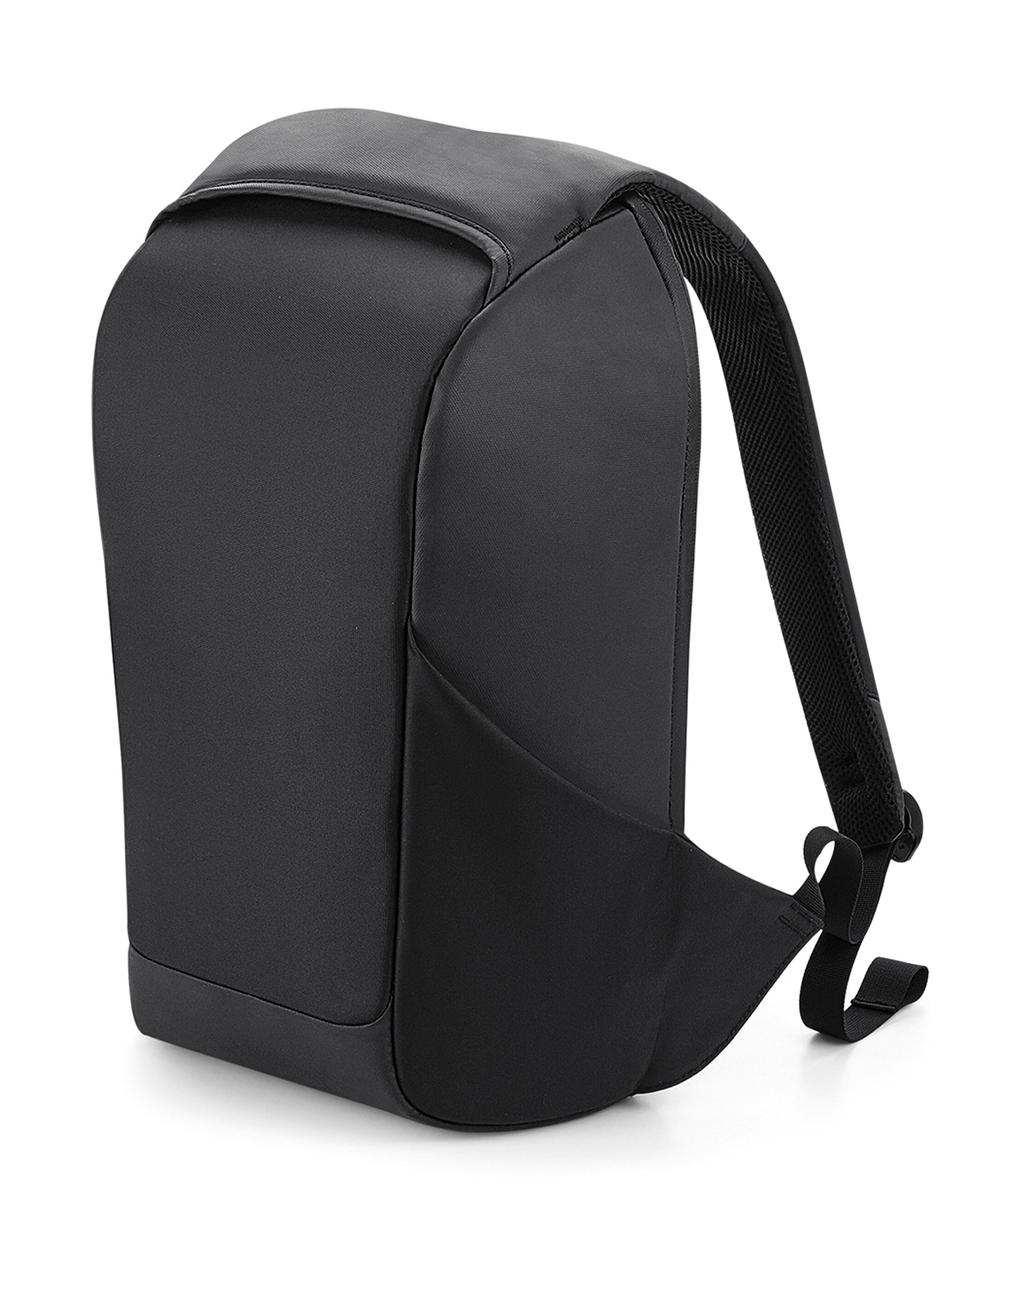  Project Charge Security Backpack in Farbe Black